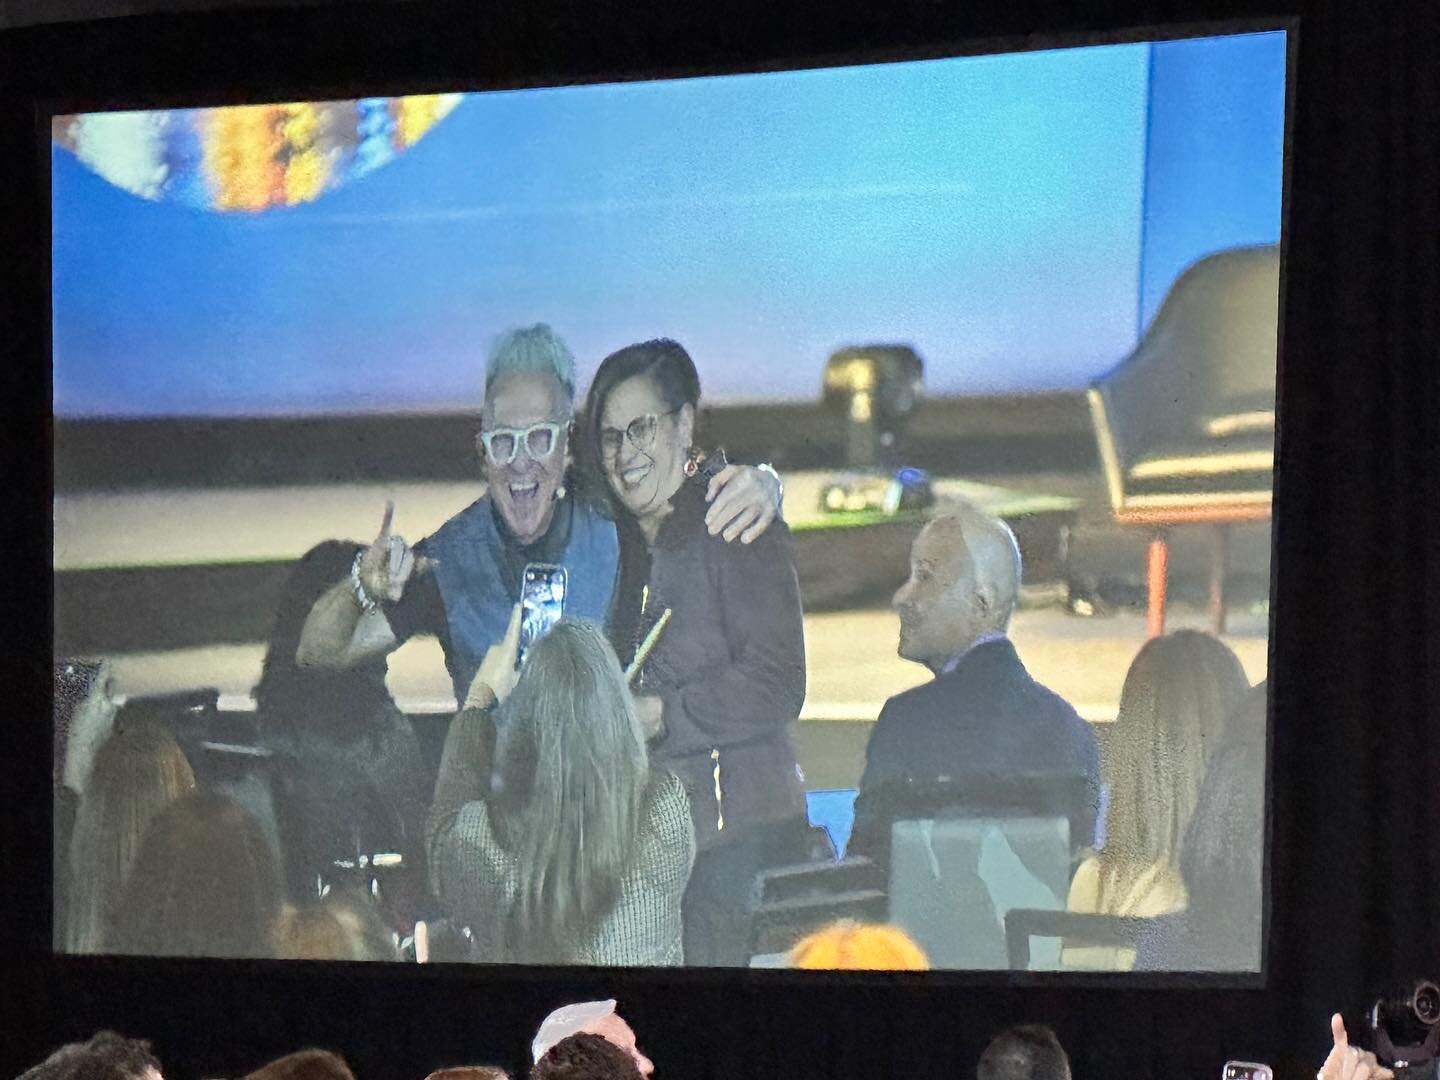 &ldquo;Love getting to interact with the audience during Hacking The Rockstar Attitude keynote.  You never know what people will say and this is honestly one of my favorite moments!  So grateful to be able to meet awesome people!&rdquo; 

#ExistLoudl